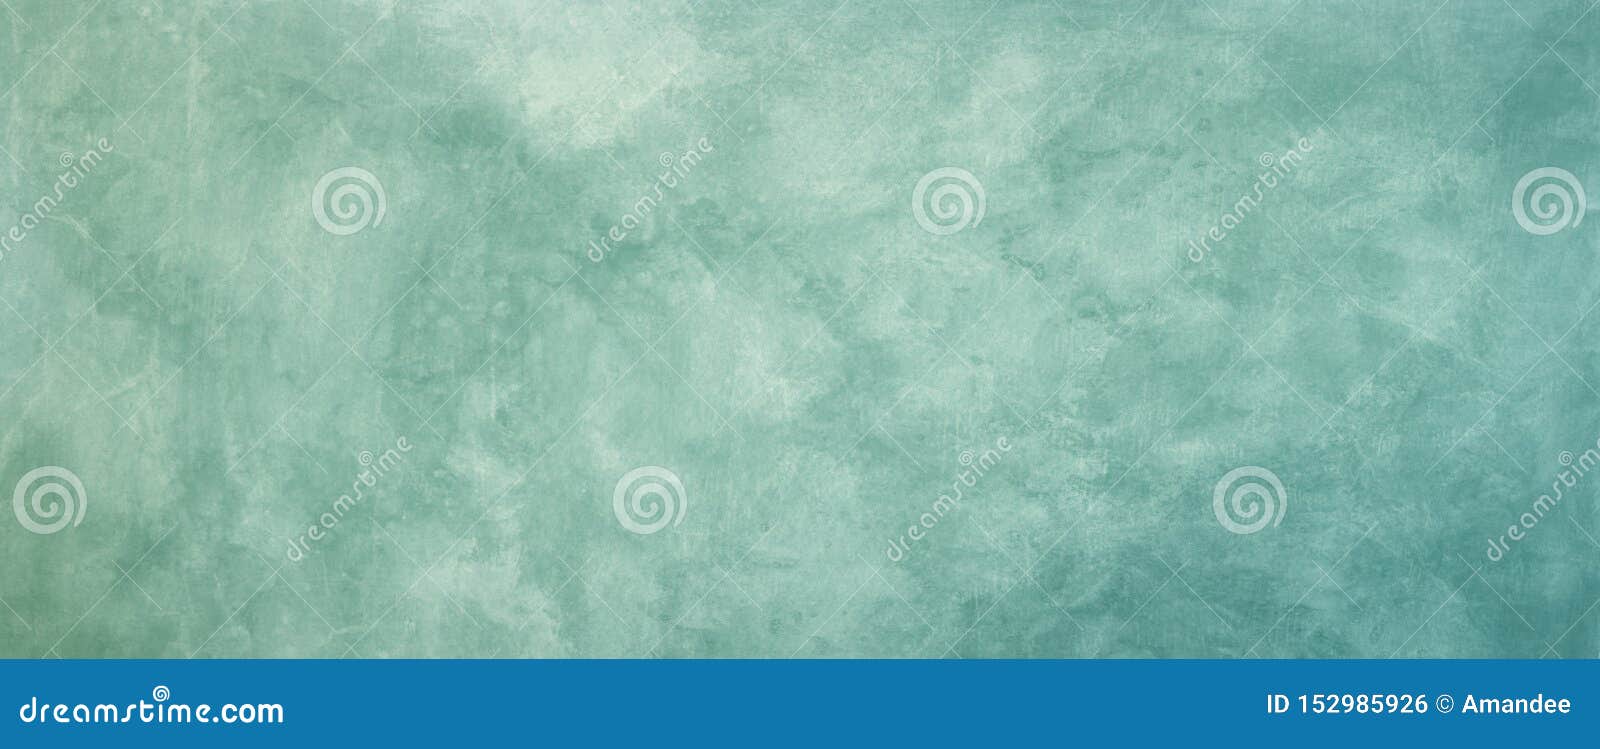 vintage background texture. old blue green marbled grunge textured  with faded distressed pattern